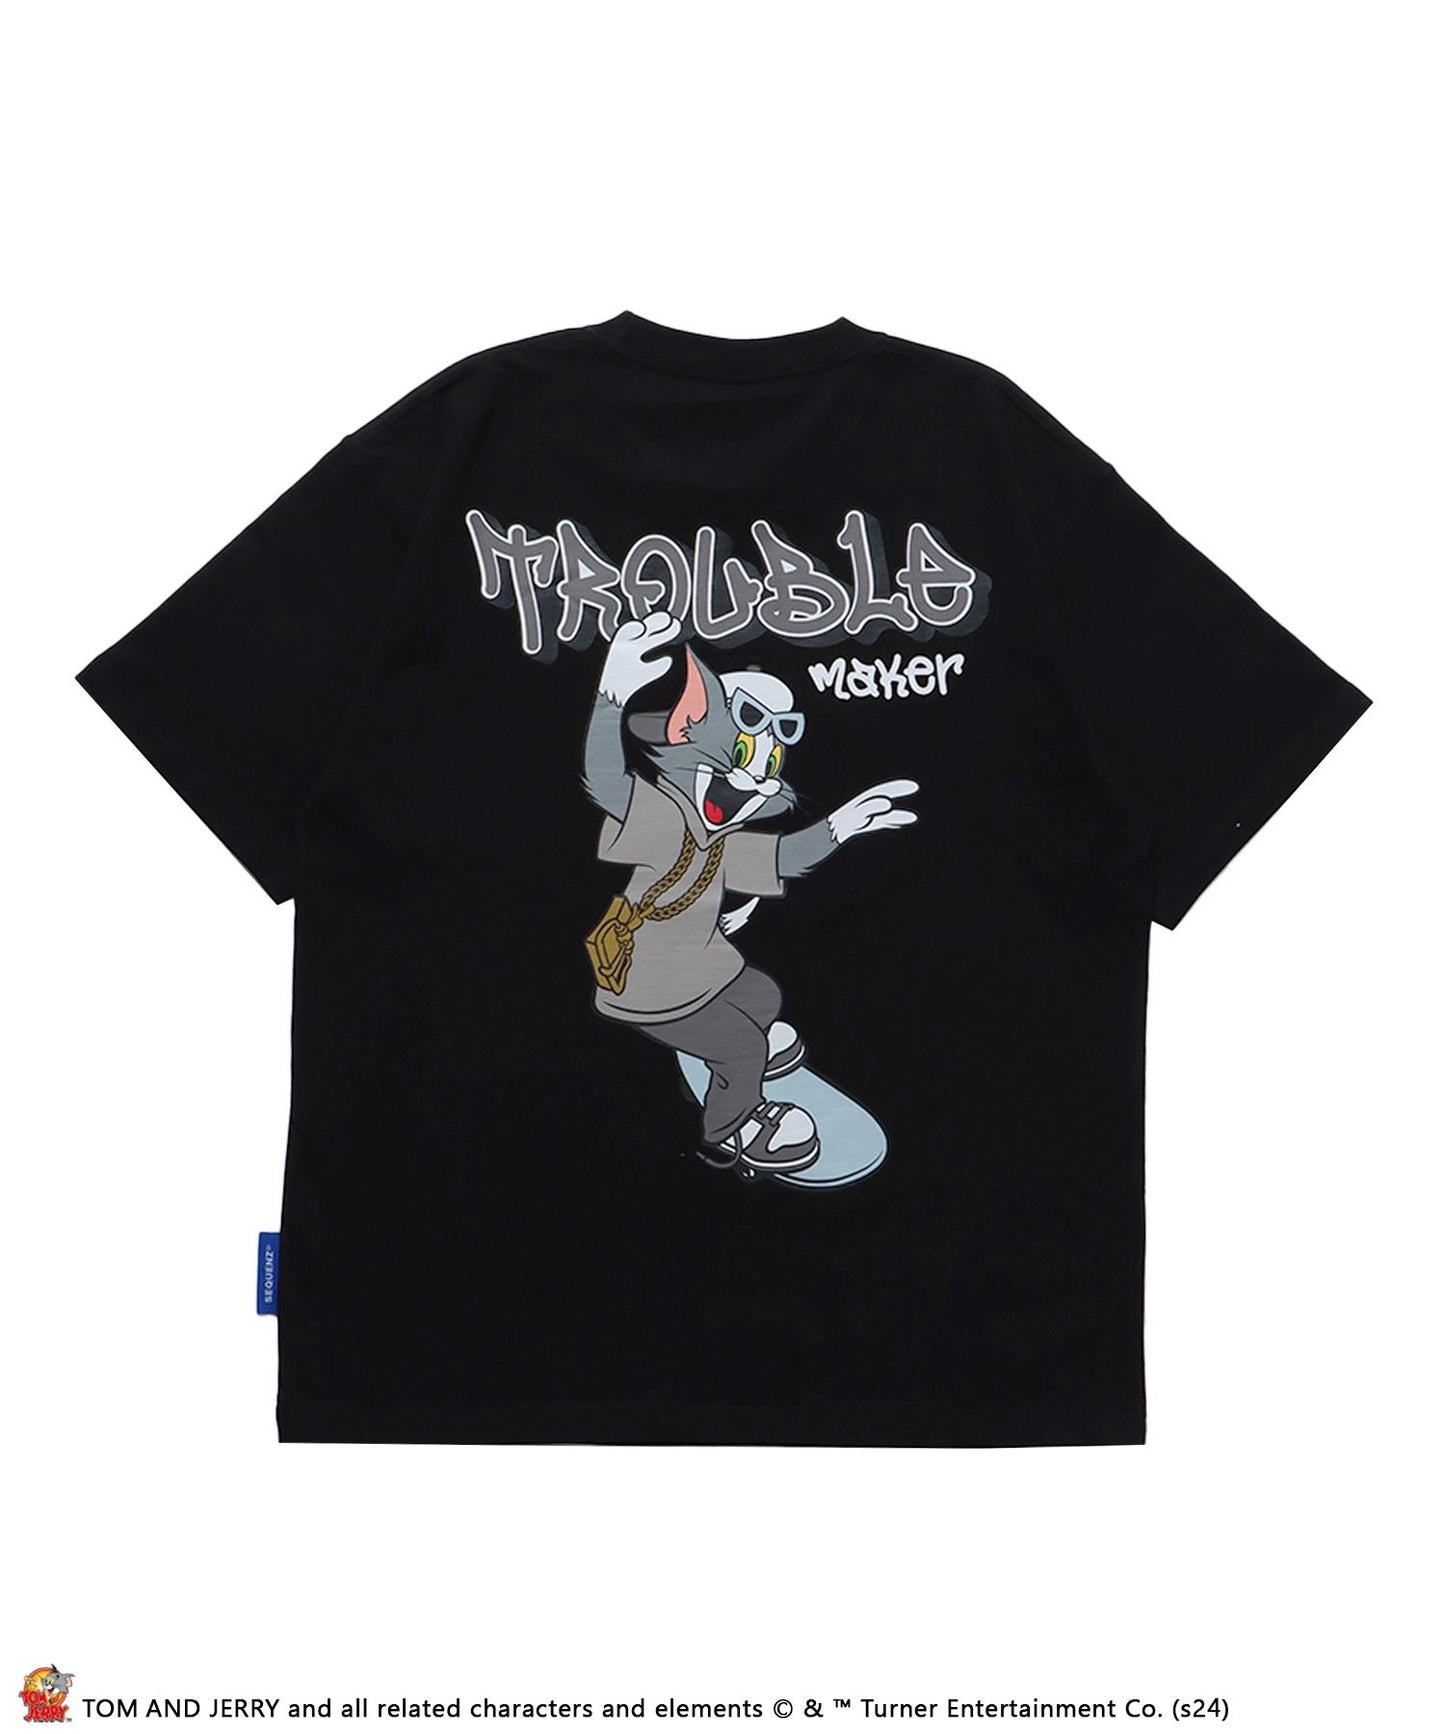 【SEQUENZ（シークエンズ）】TJ 90s SK8 S/S TEE / TOM and JERRY トムジェリ スケート Tシャツ グラフィティ プリント 半袖 ブラック